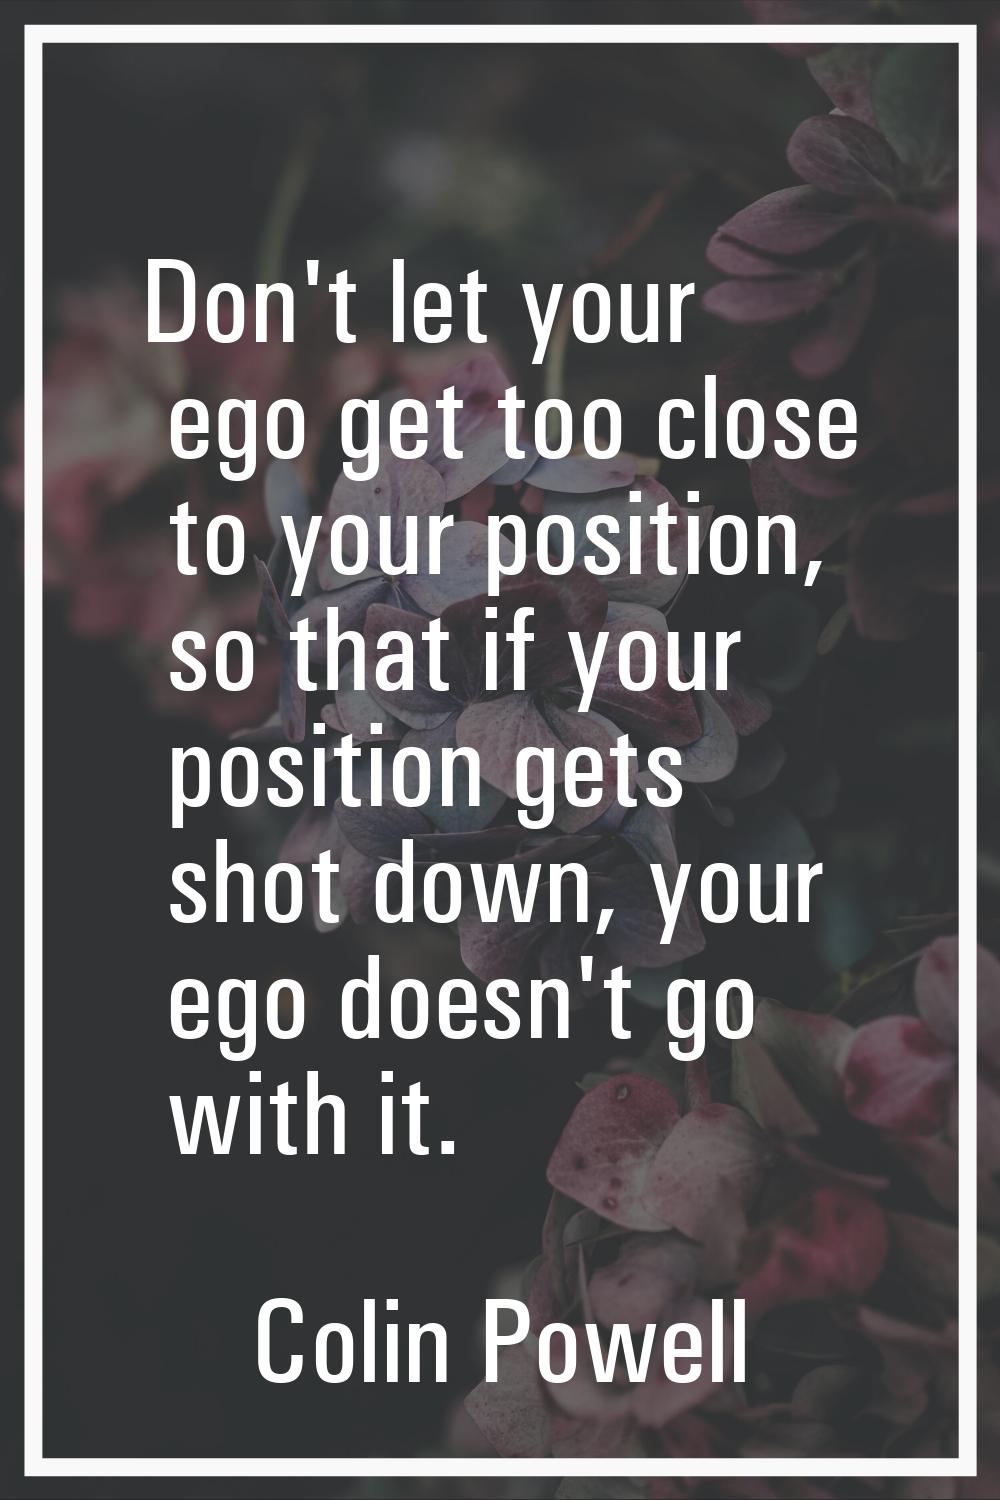 Don't let your ego get too close to your position, so that if your position gets shot down, your eg